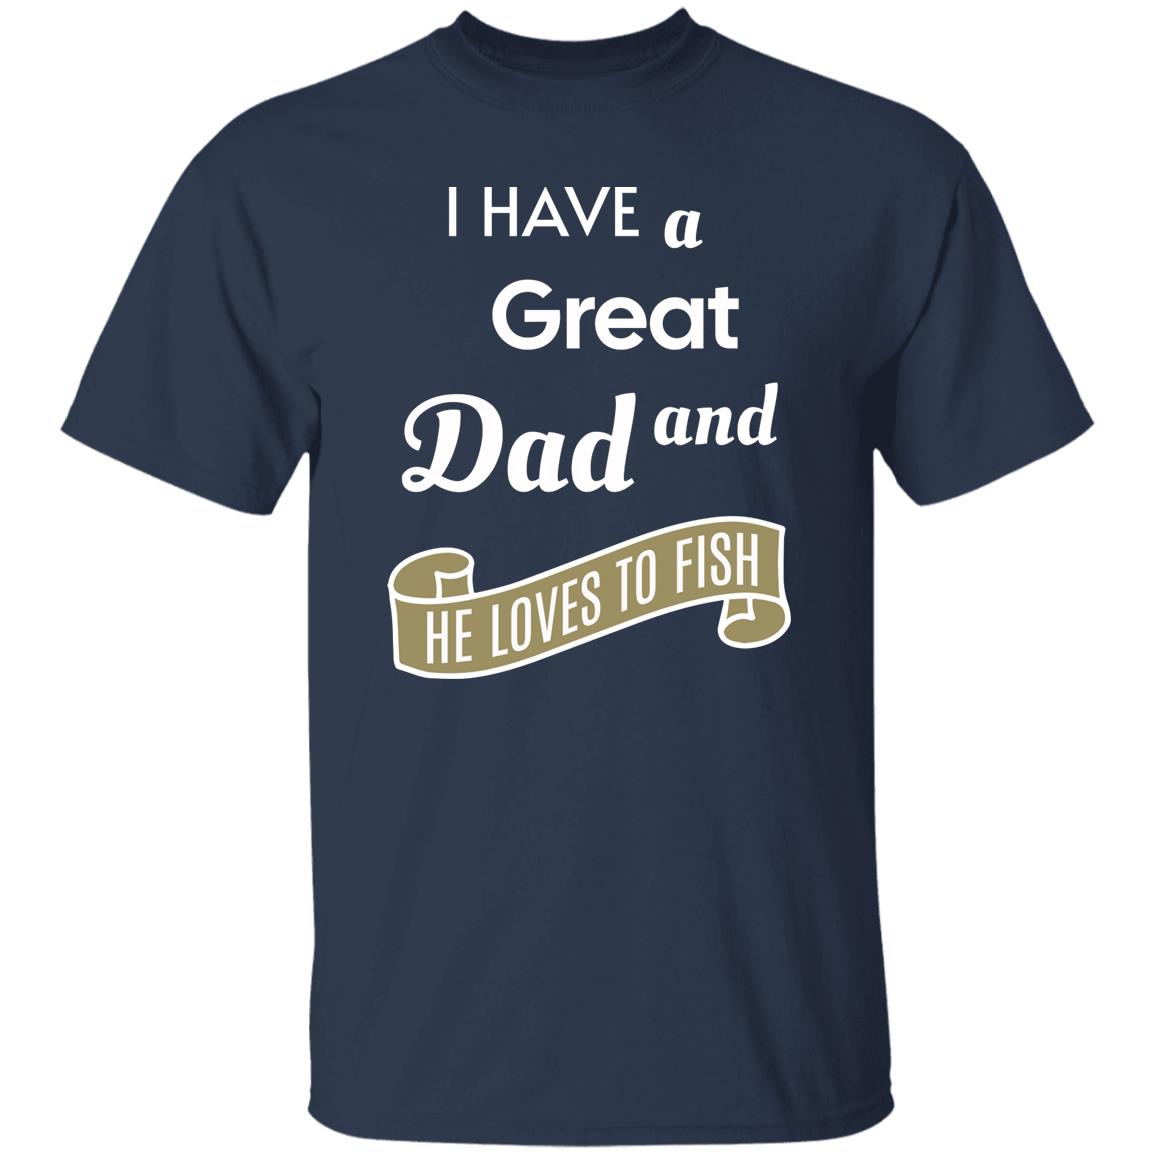 I have a great dad and he loves fishing k t-shirt navy